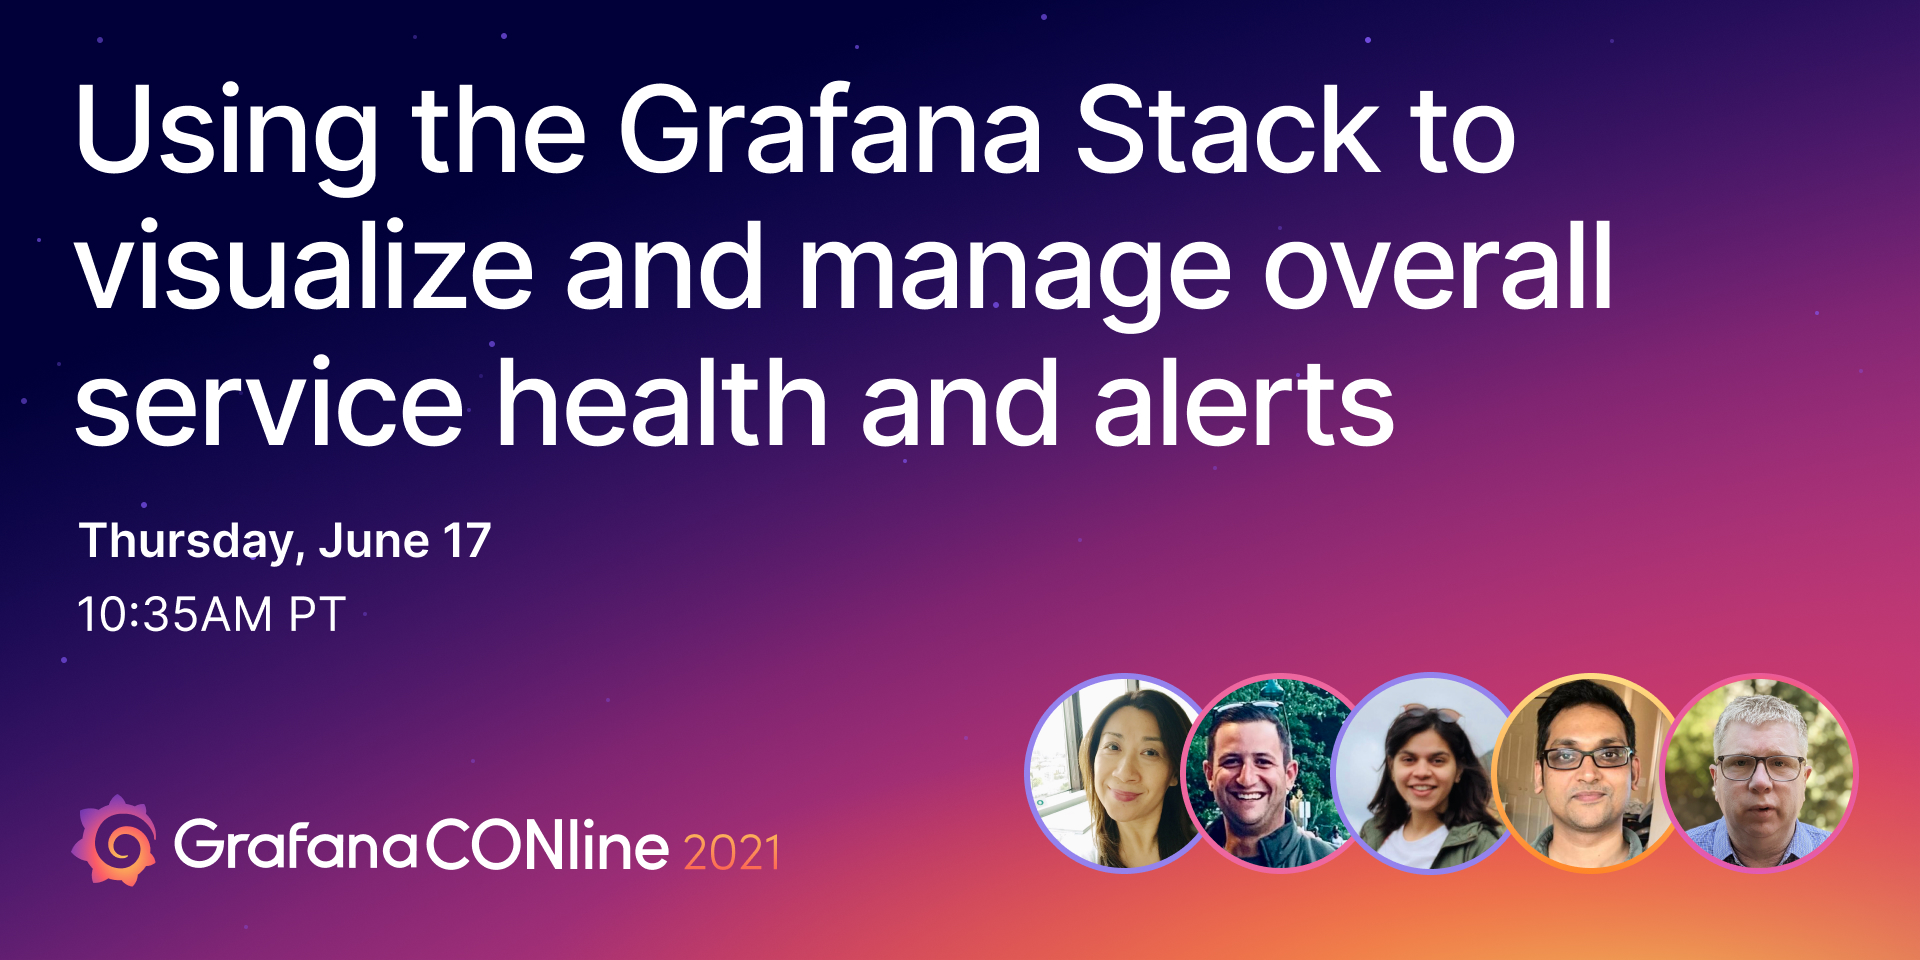 Using the Grafana Stack to visualize and manage overall service health and alerts